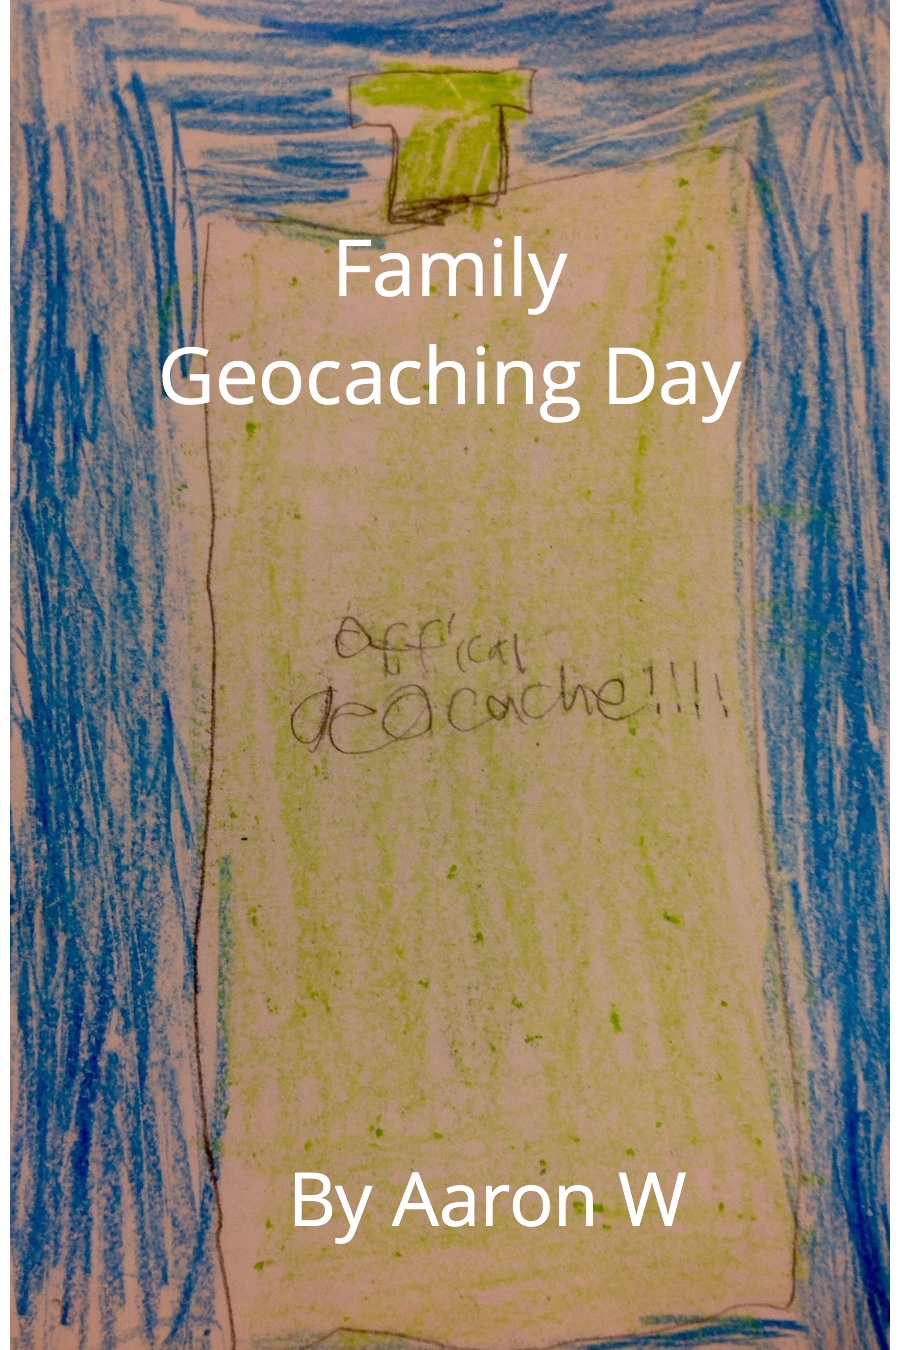 Family Geocaching Day by Aaron W